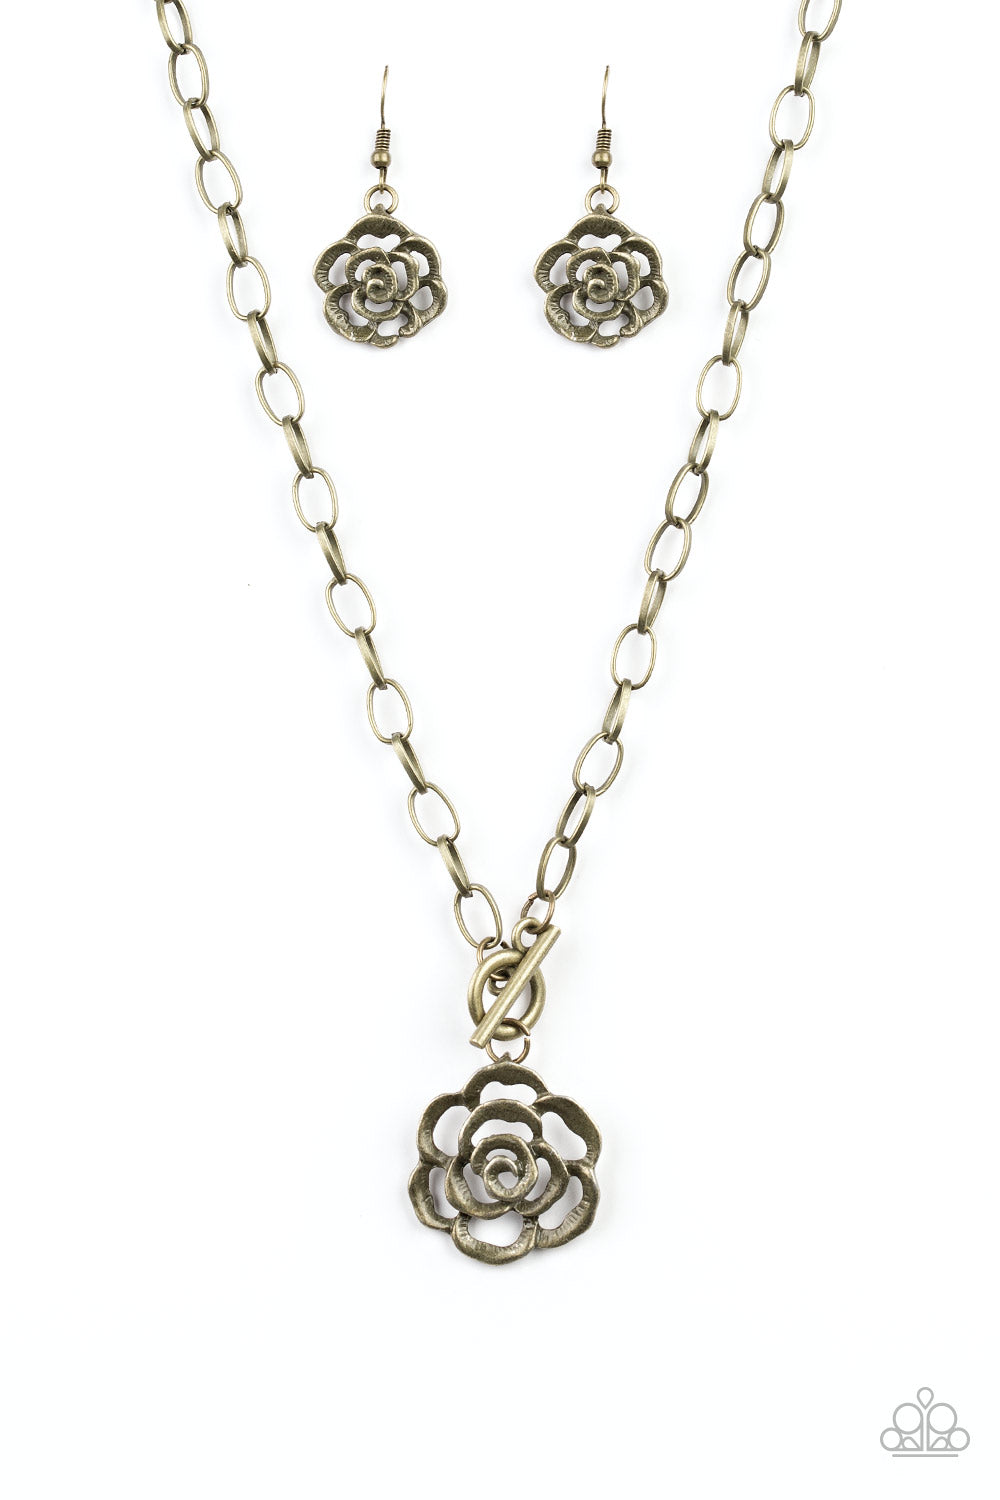 beautifully-in-bloom-brass-p2wh-brxx-143xx